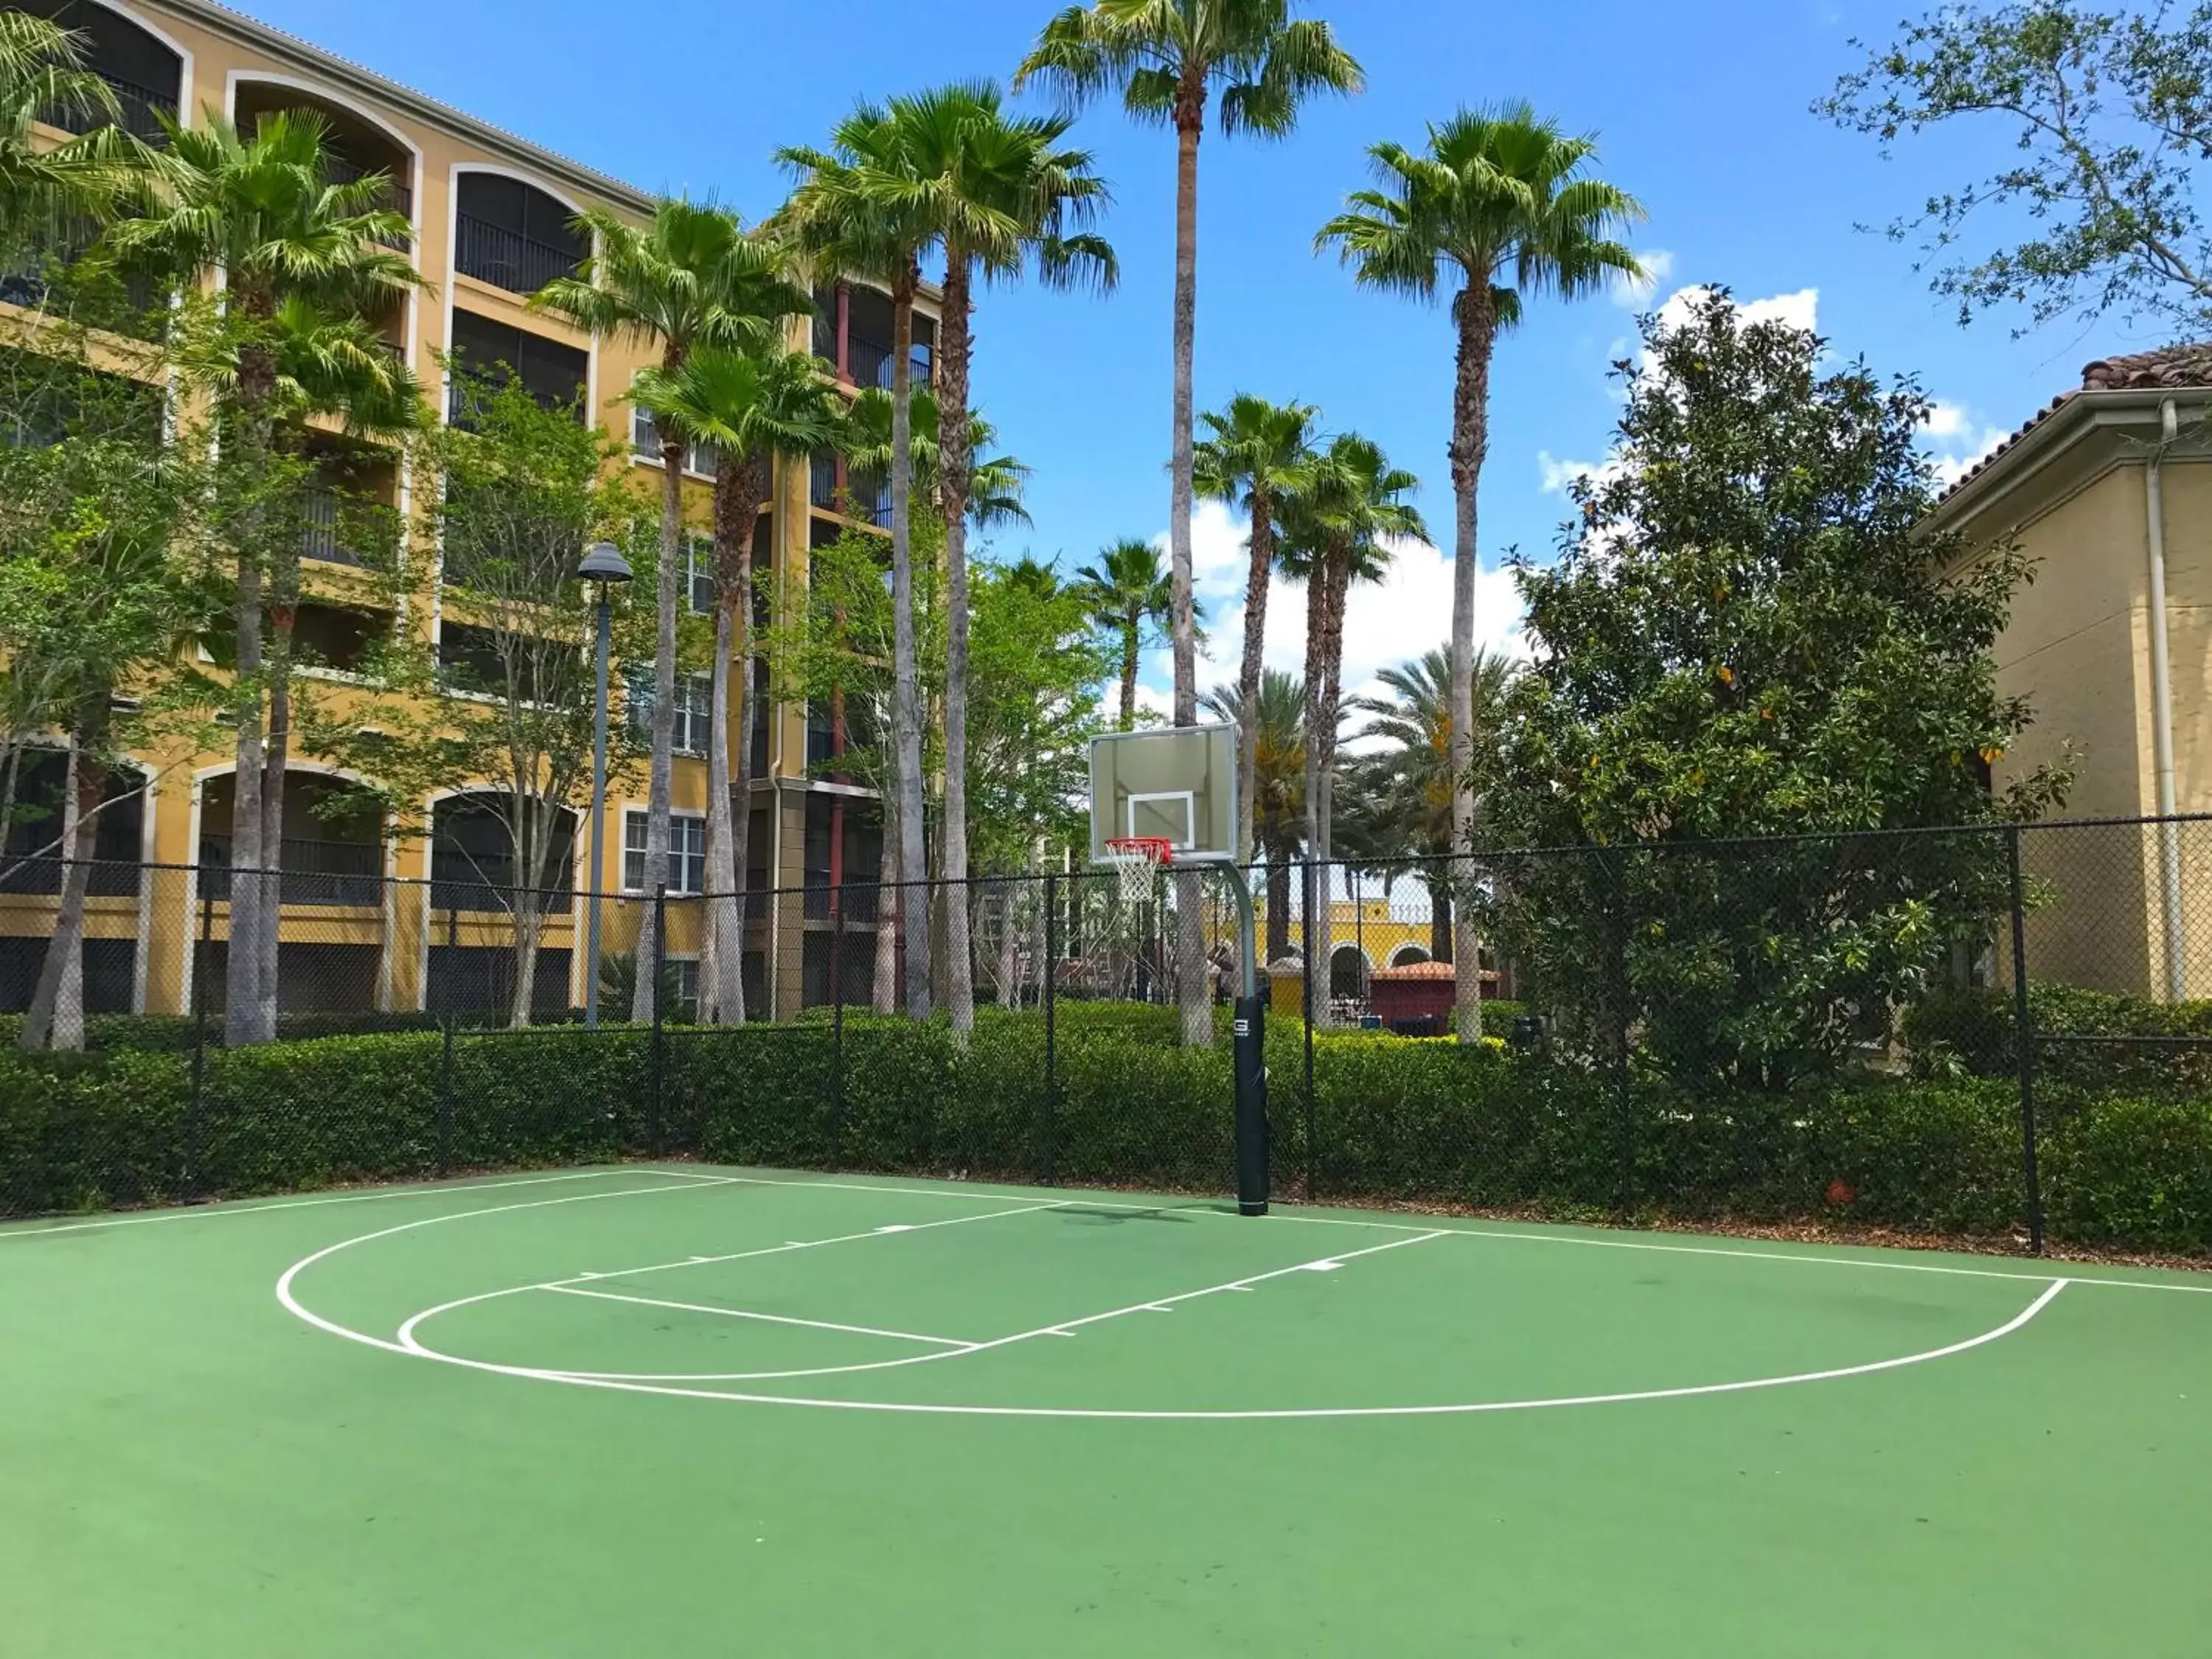 Sports, Other Activities in Hilton Grand Vacations Club Tuscany Village Orlando